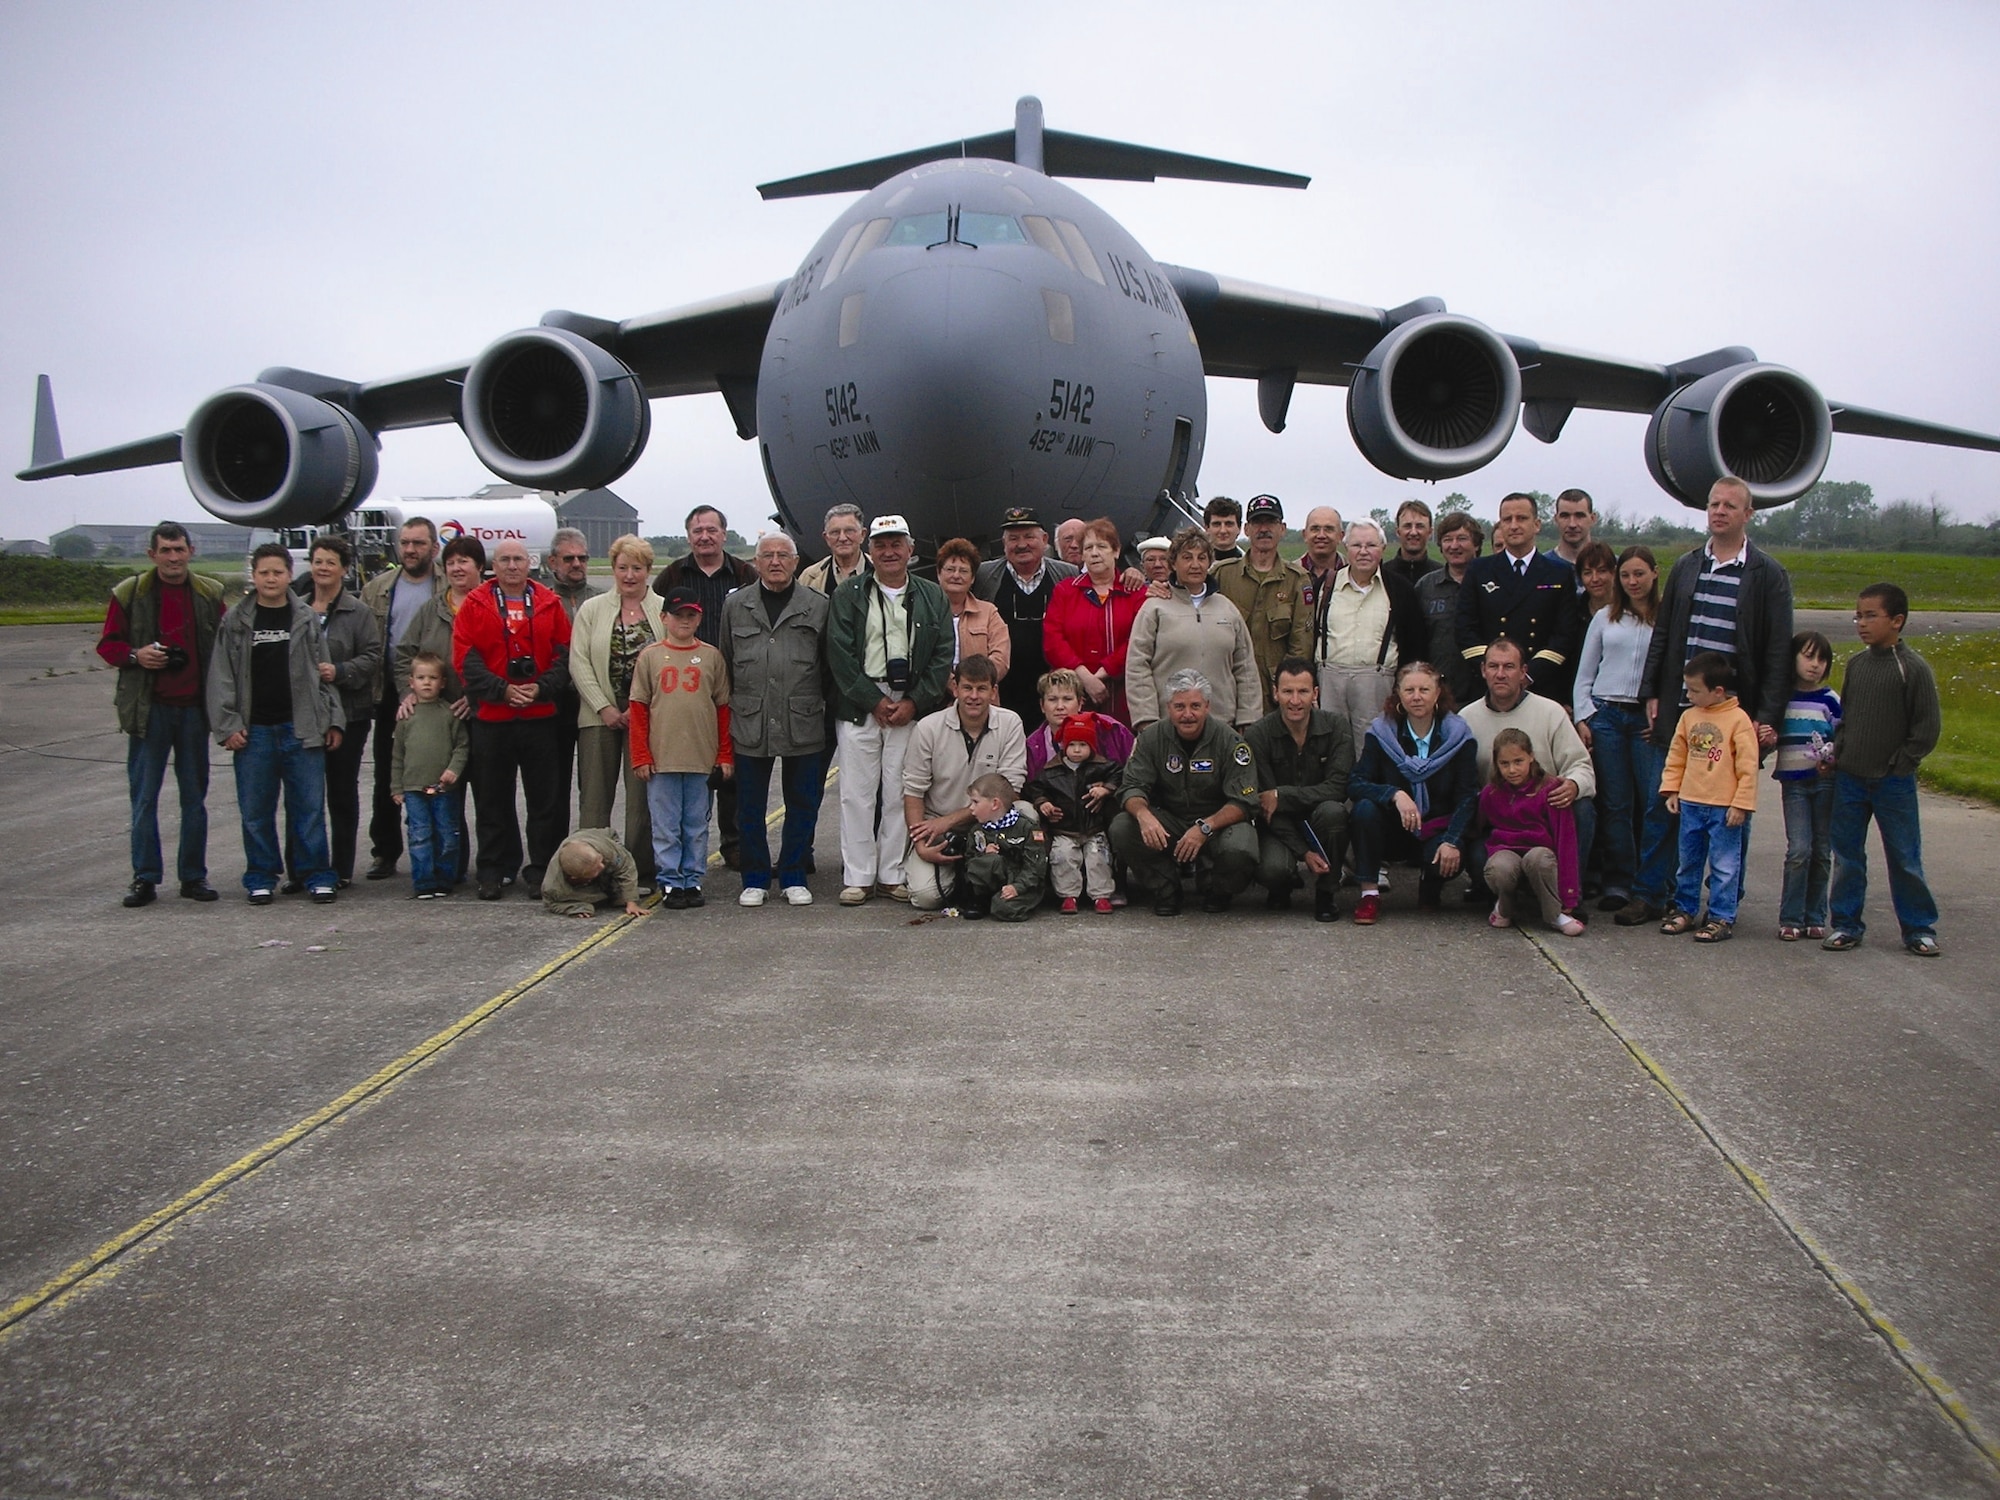 The town of Ostrava, Czech bids farewell to the 729th Airlift Sqaudron, March Air Reserve Base, after their participation in NATO days this past September. (U.S. Air Force photo by Capt. Ryan Van Scotter)